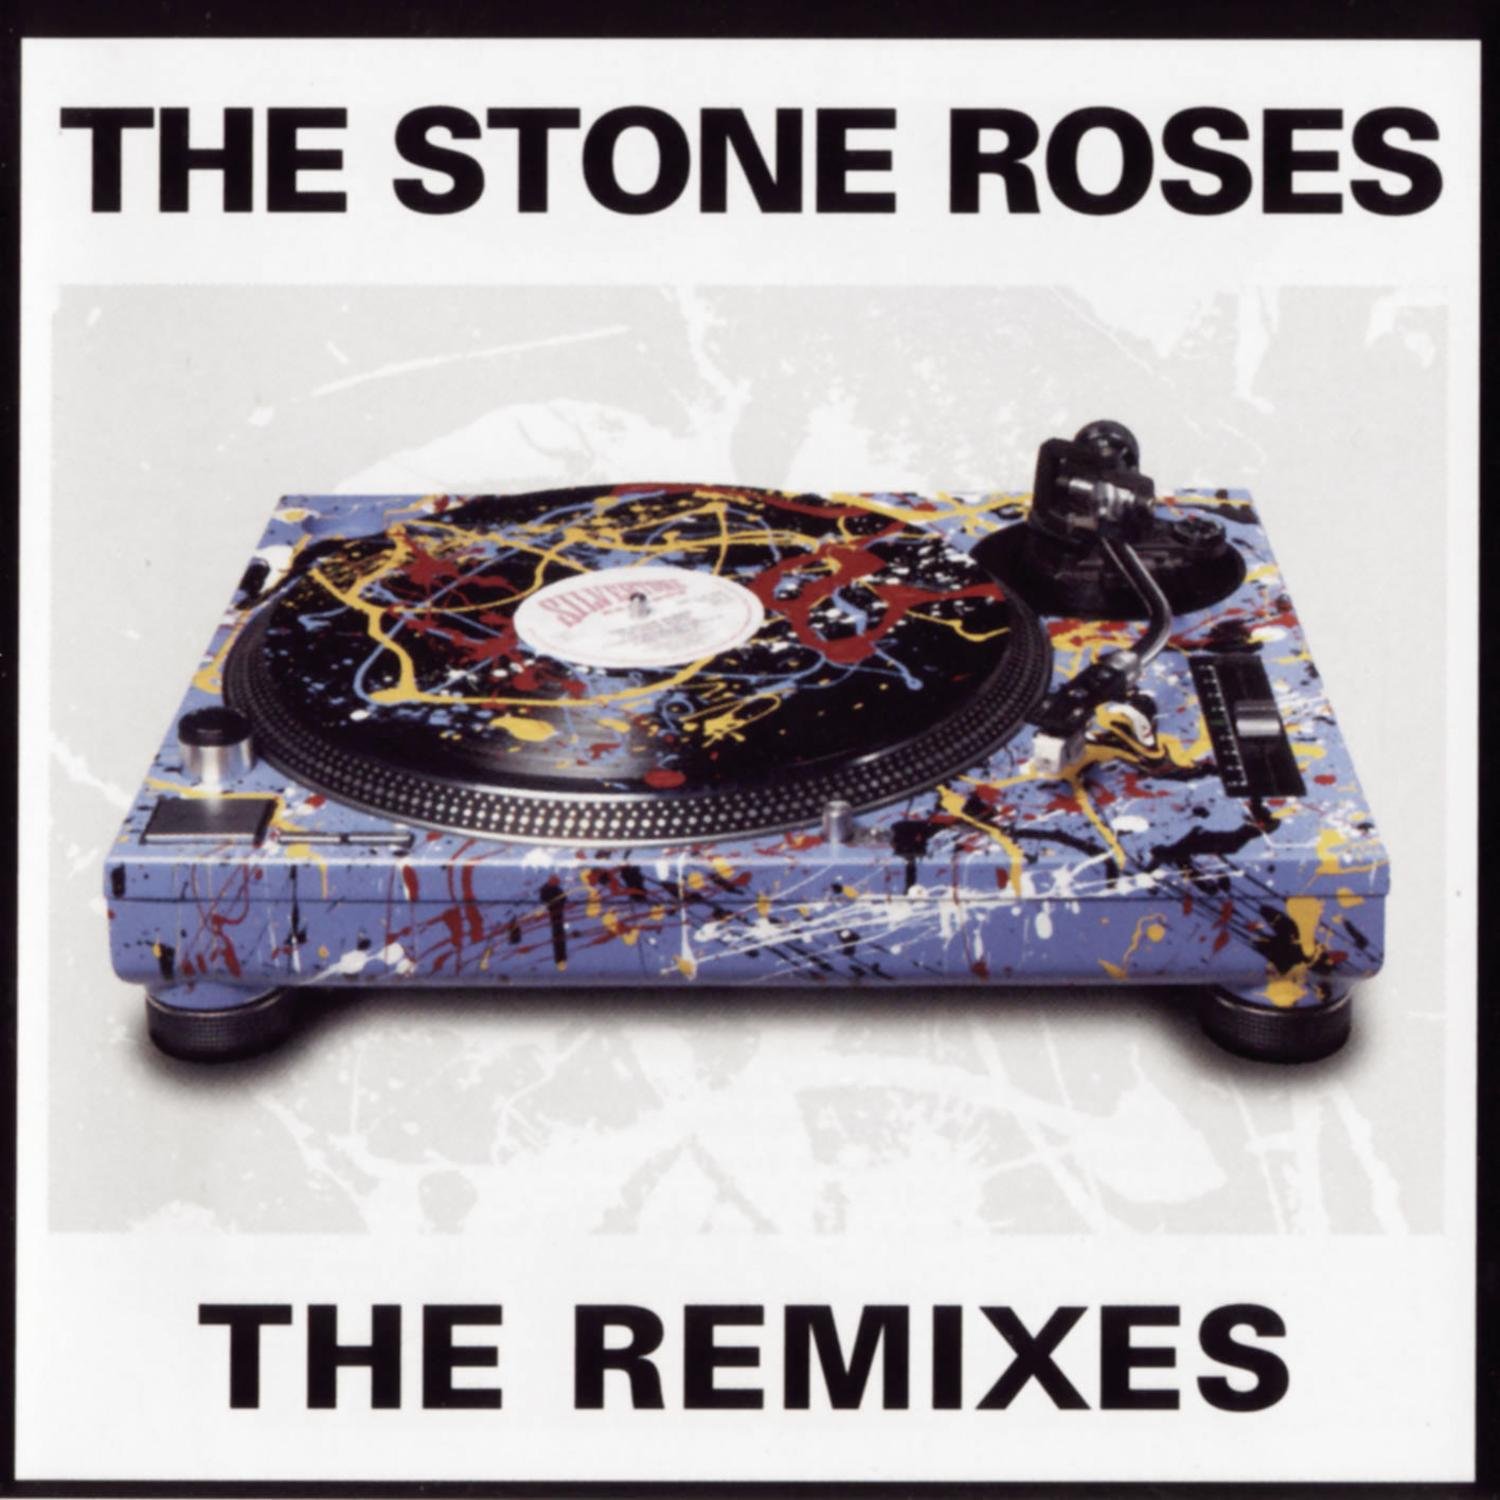 The Stone Roses "The Remixes" 2LP